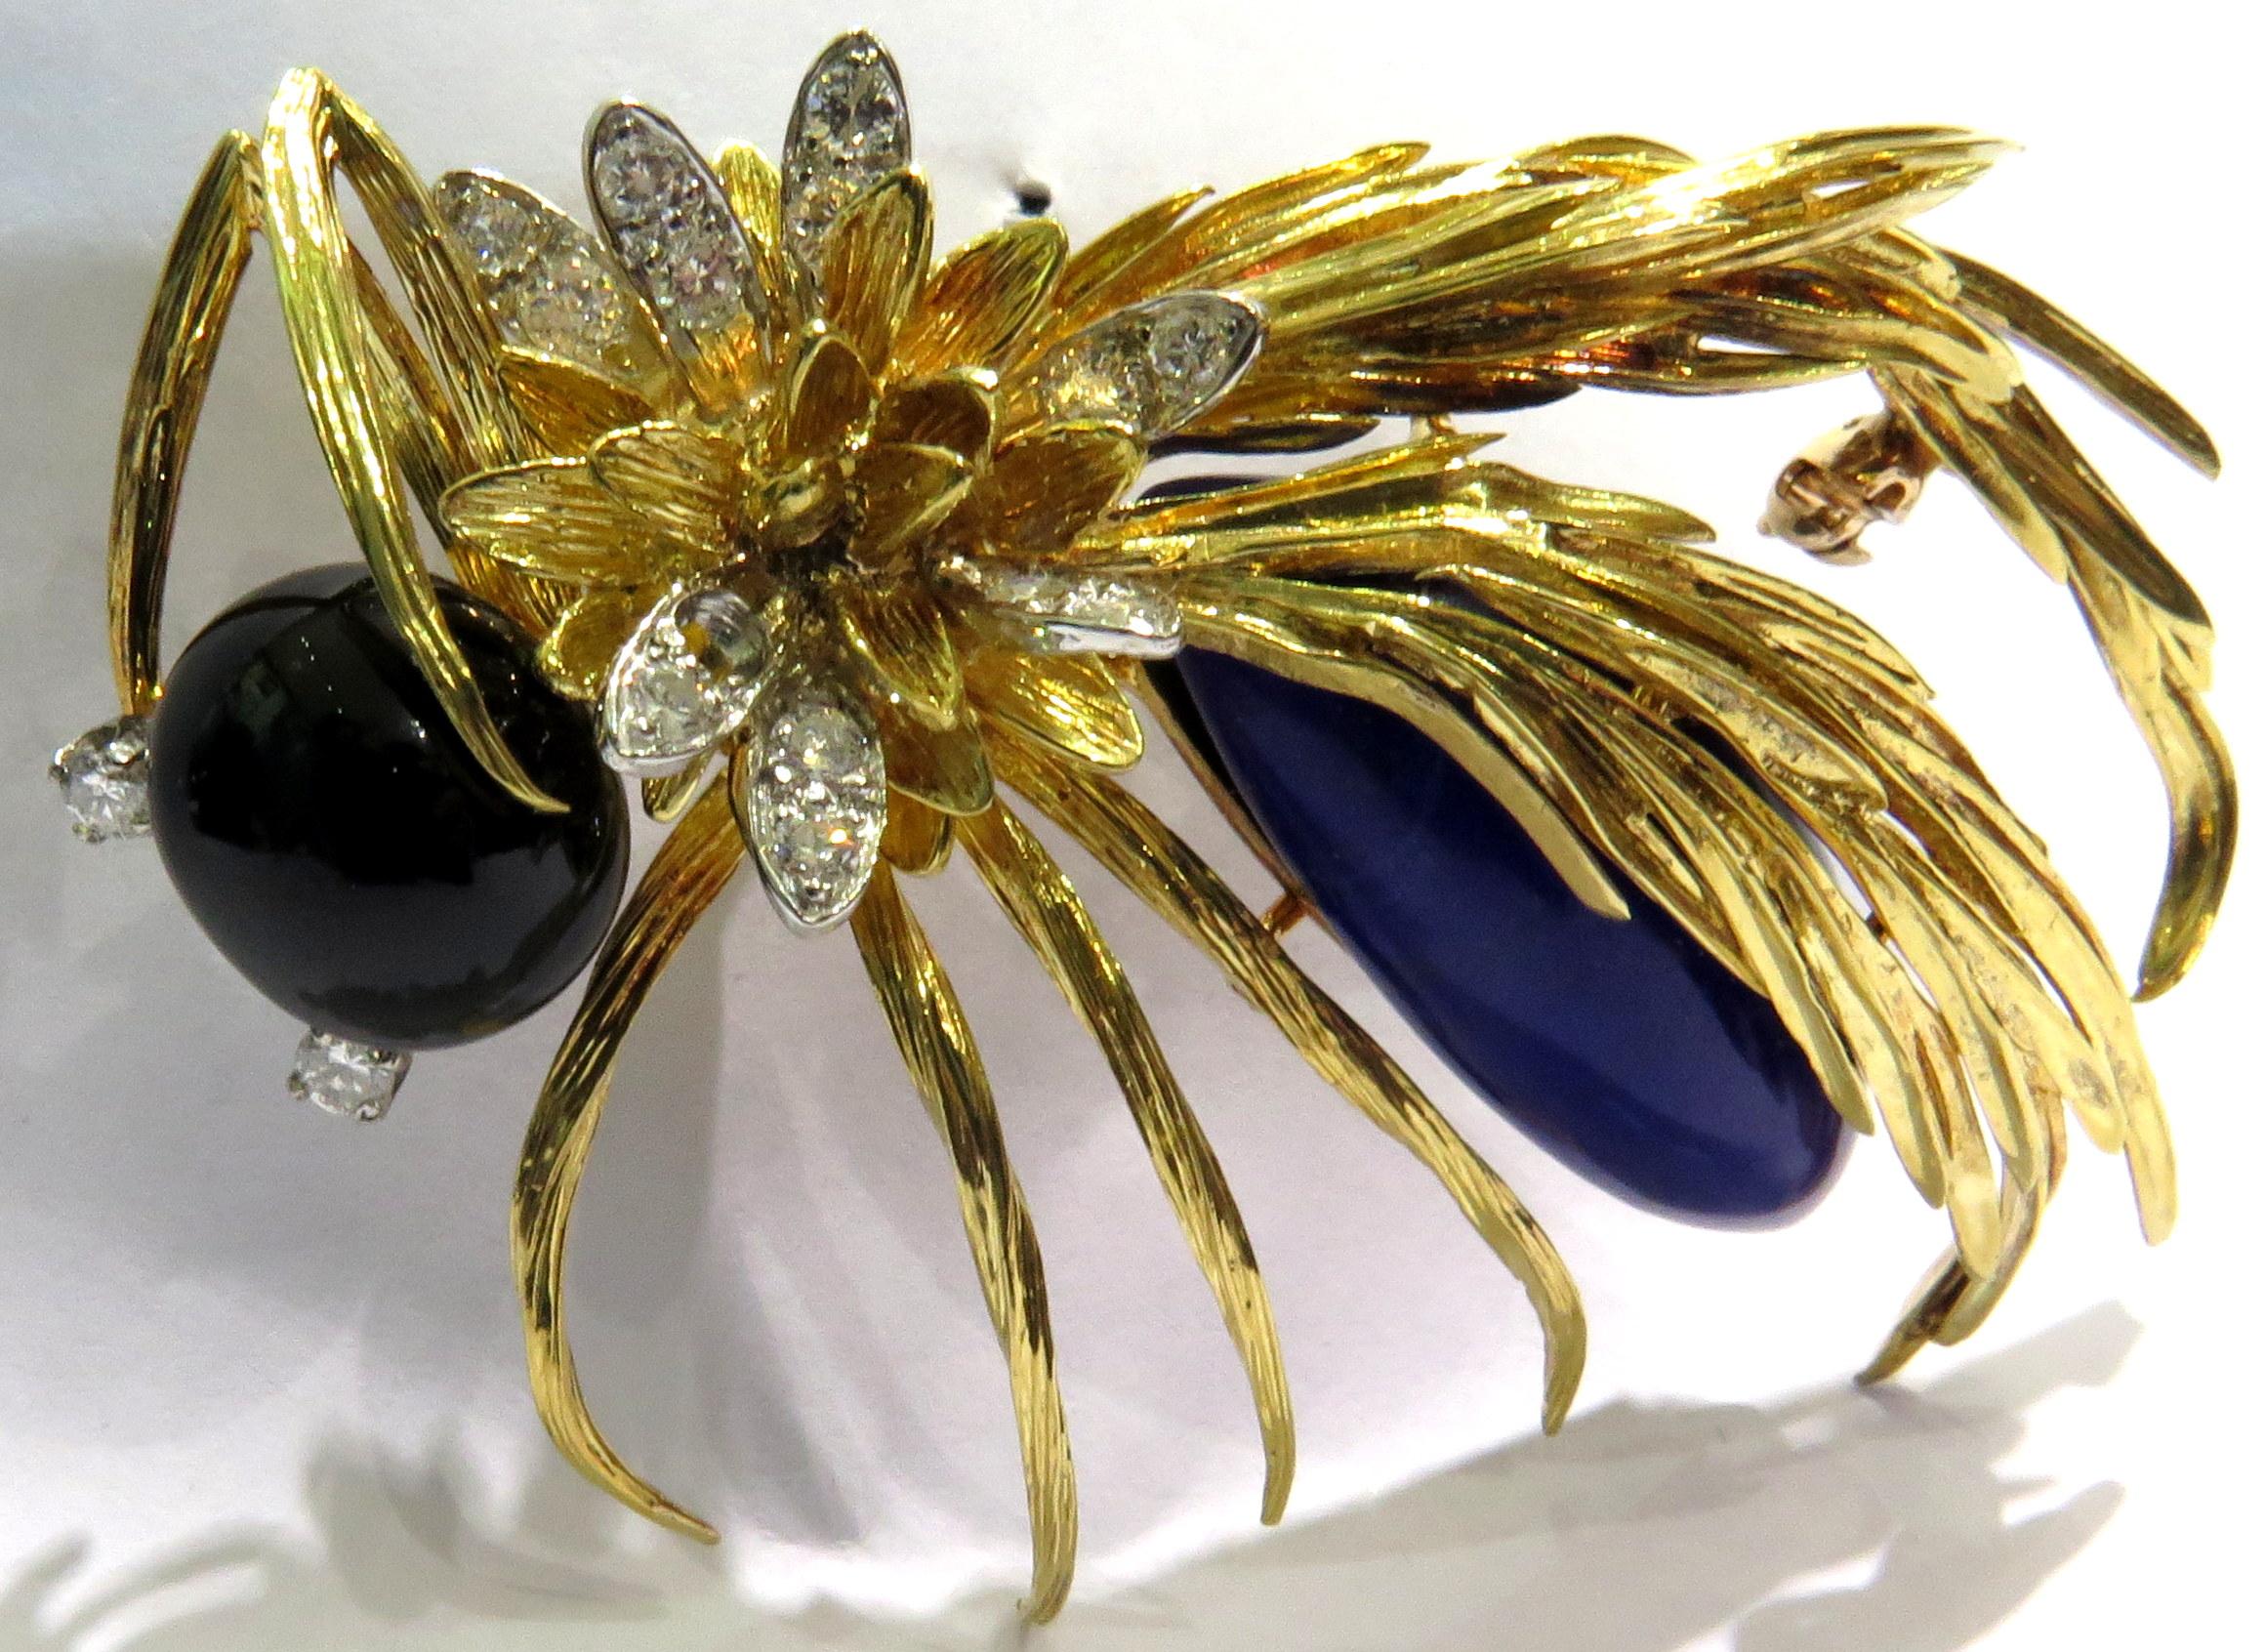 Huge Hammerman Brothers Platinum Gold Wasp Pin Brooch With Diamonds Lapis & Onyx For Sale 8